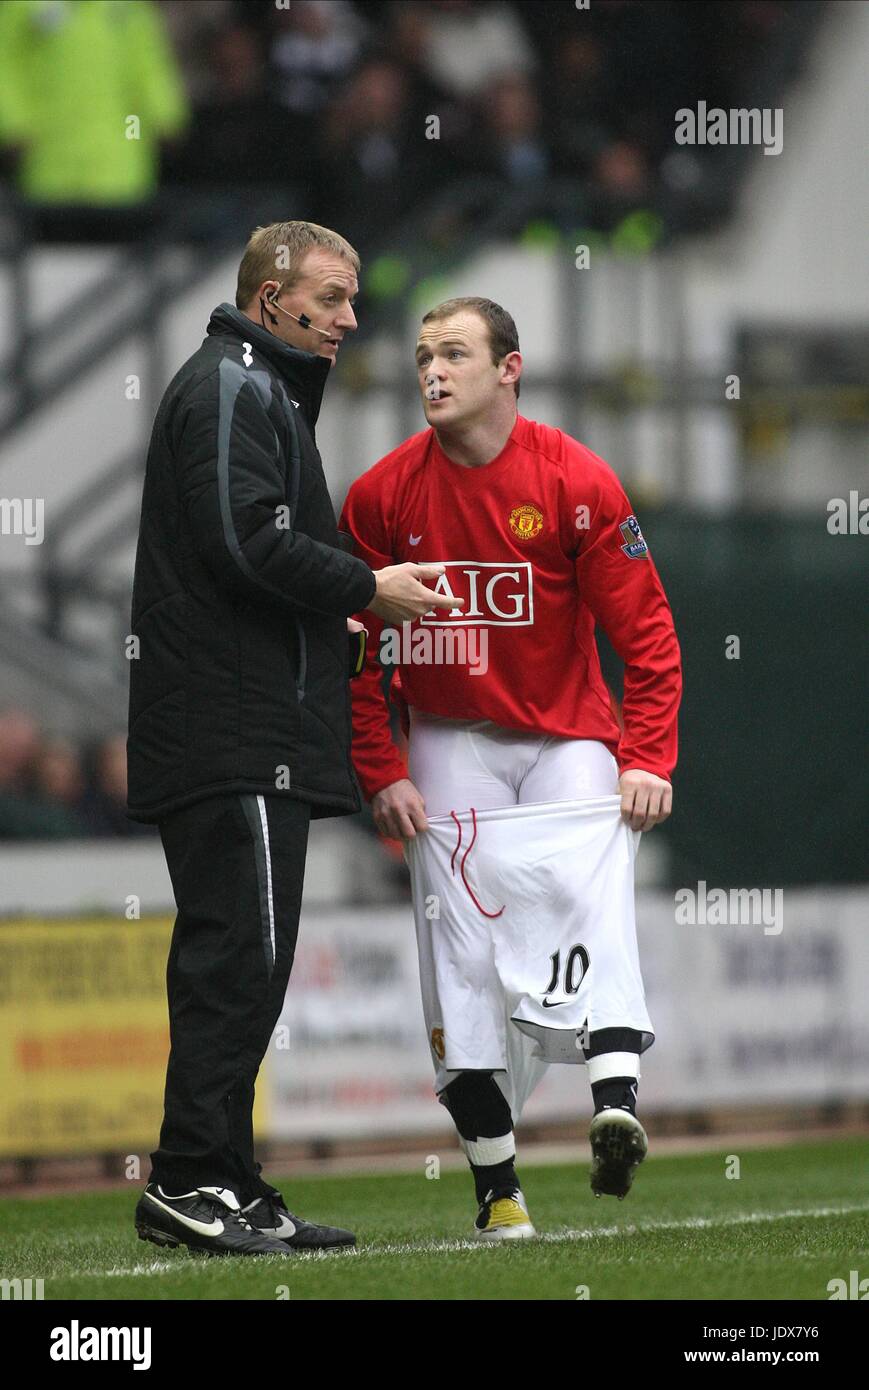 WAYNE ROONEY CHANGES HIS SHORTS, DERBY COUNTY V MANCHESTER UNITED, DERBY COUNTY V MANCHESTER UTD, 2008 Stock Photo